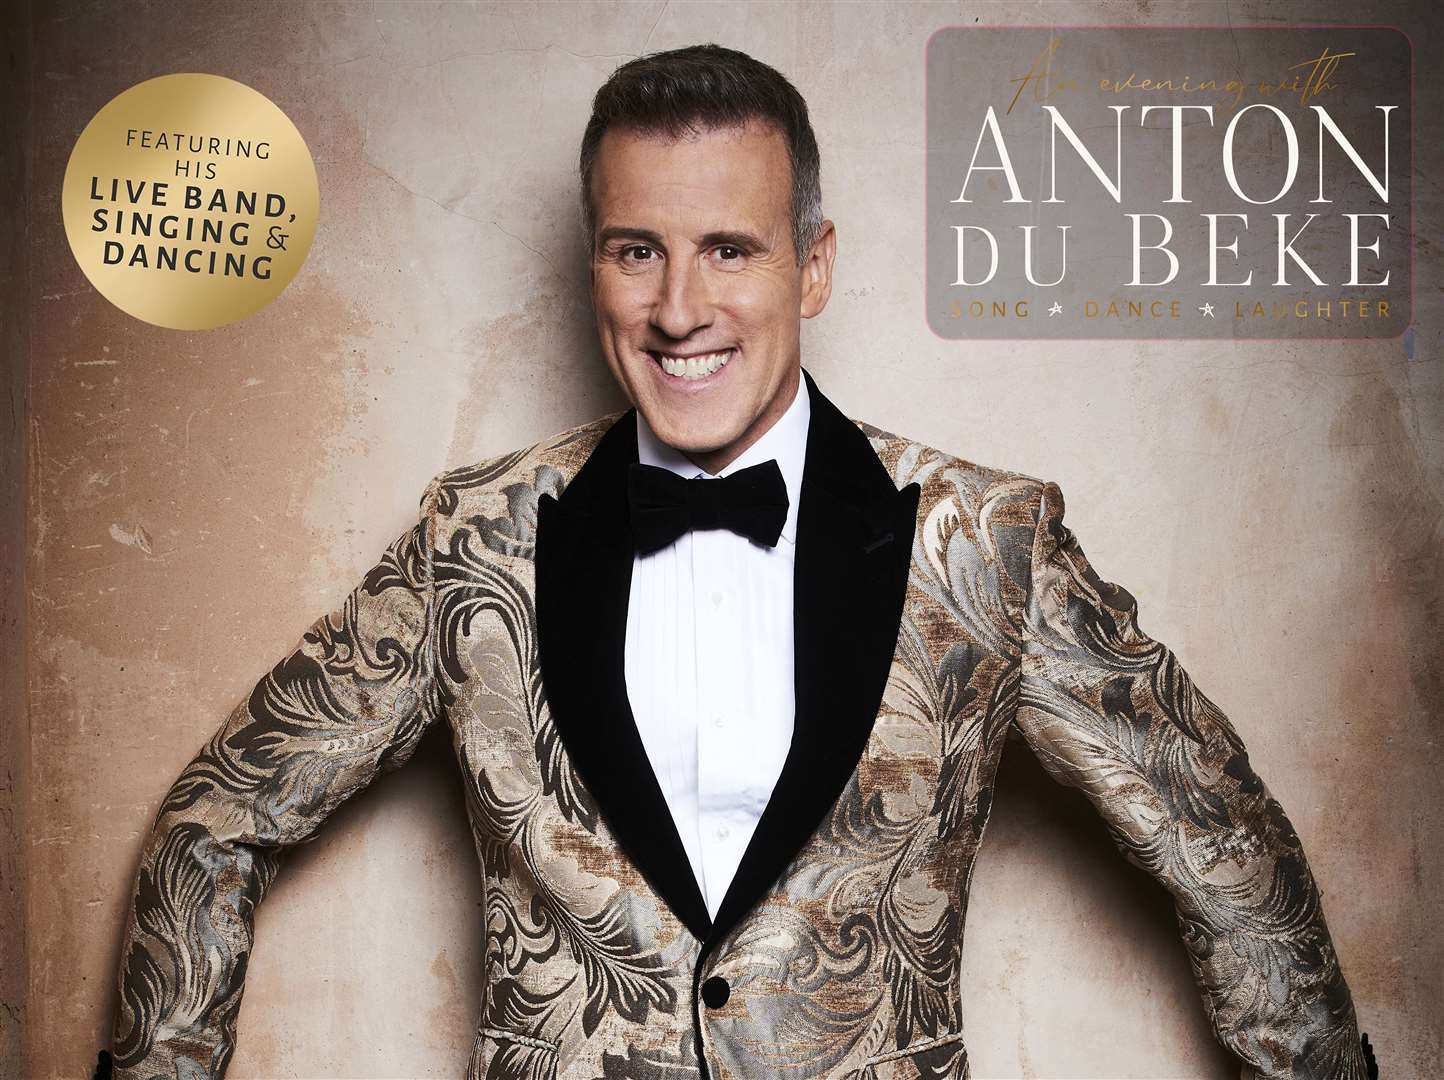 An Evening With Anton du Beke And Friends.